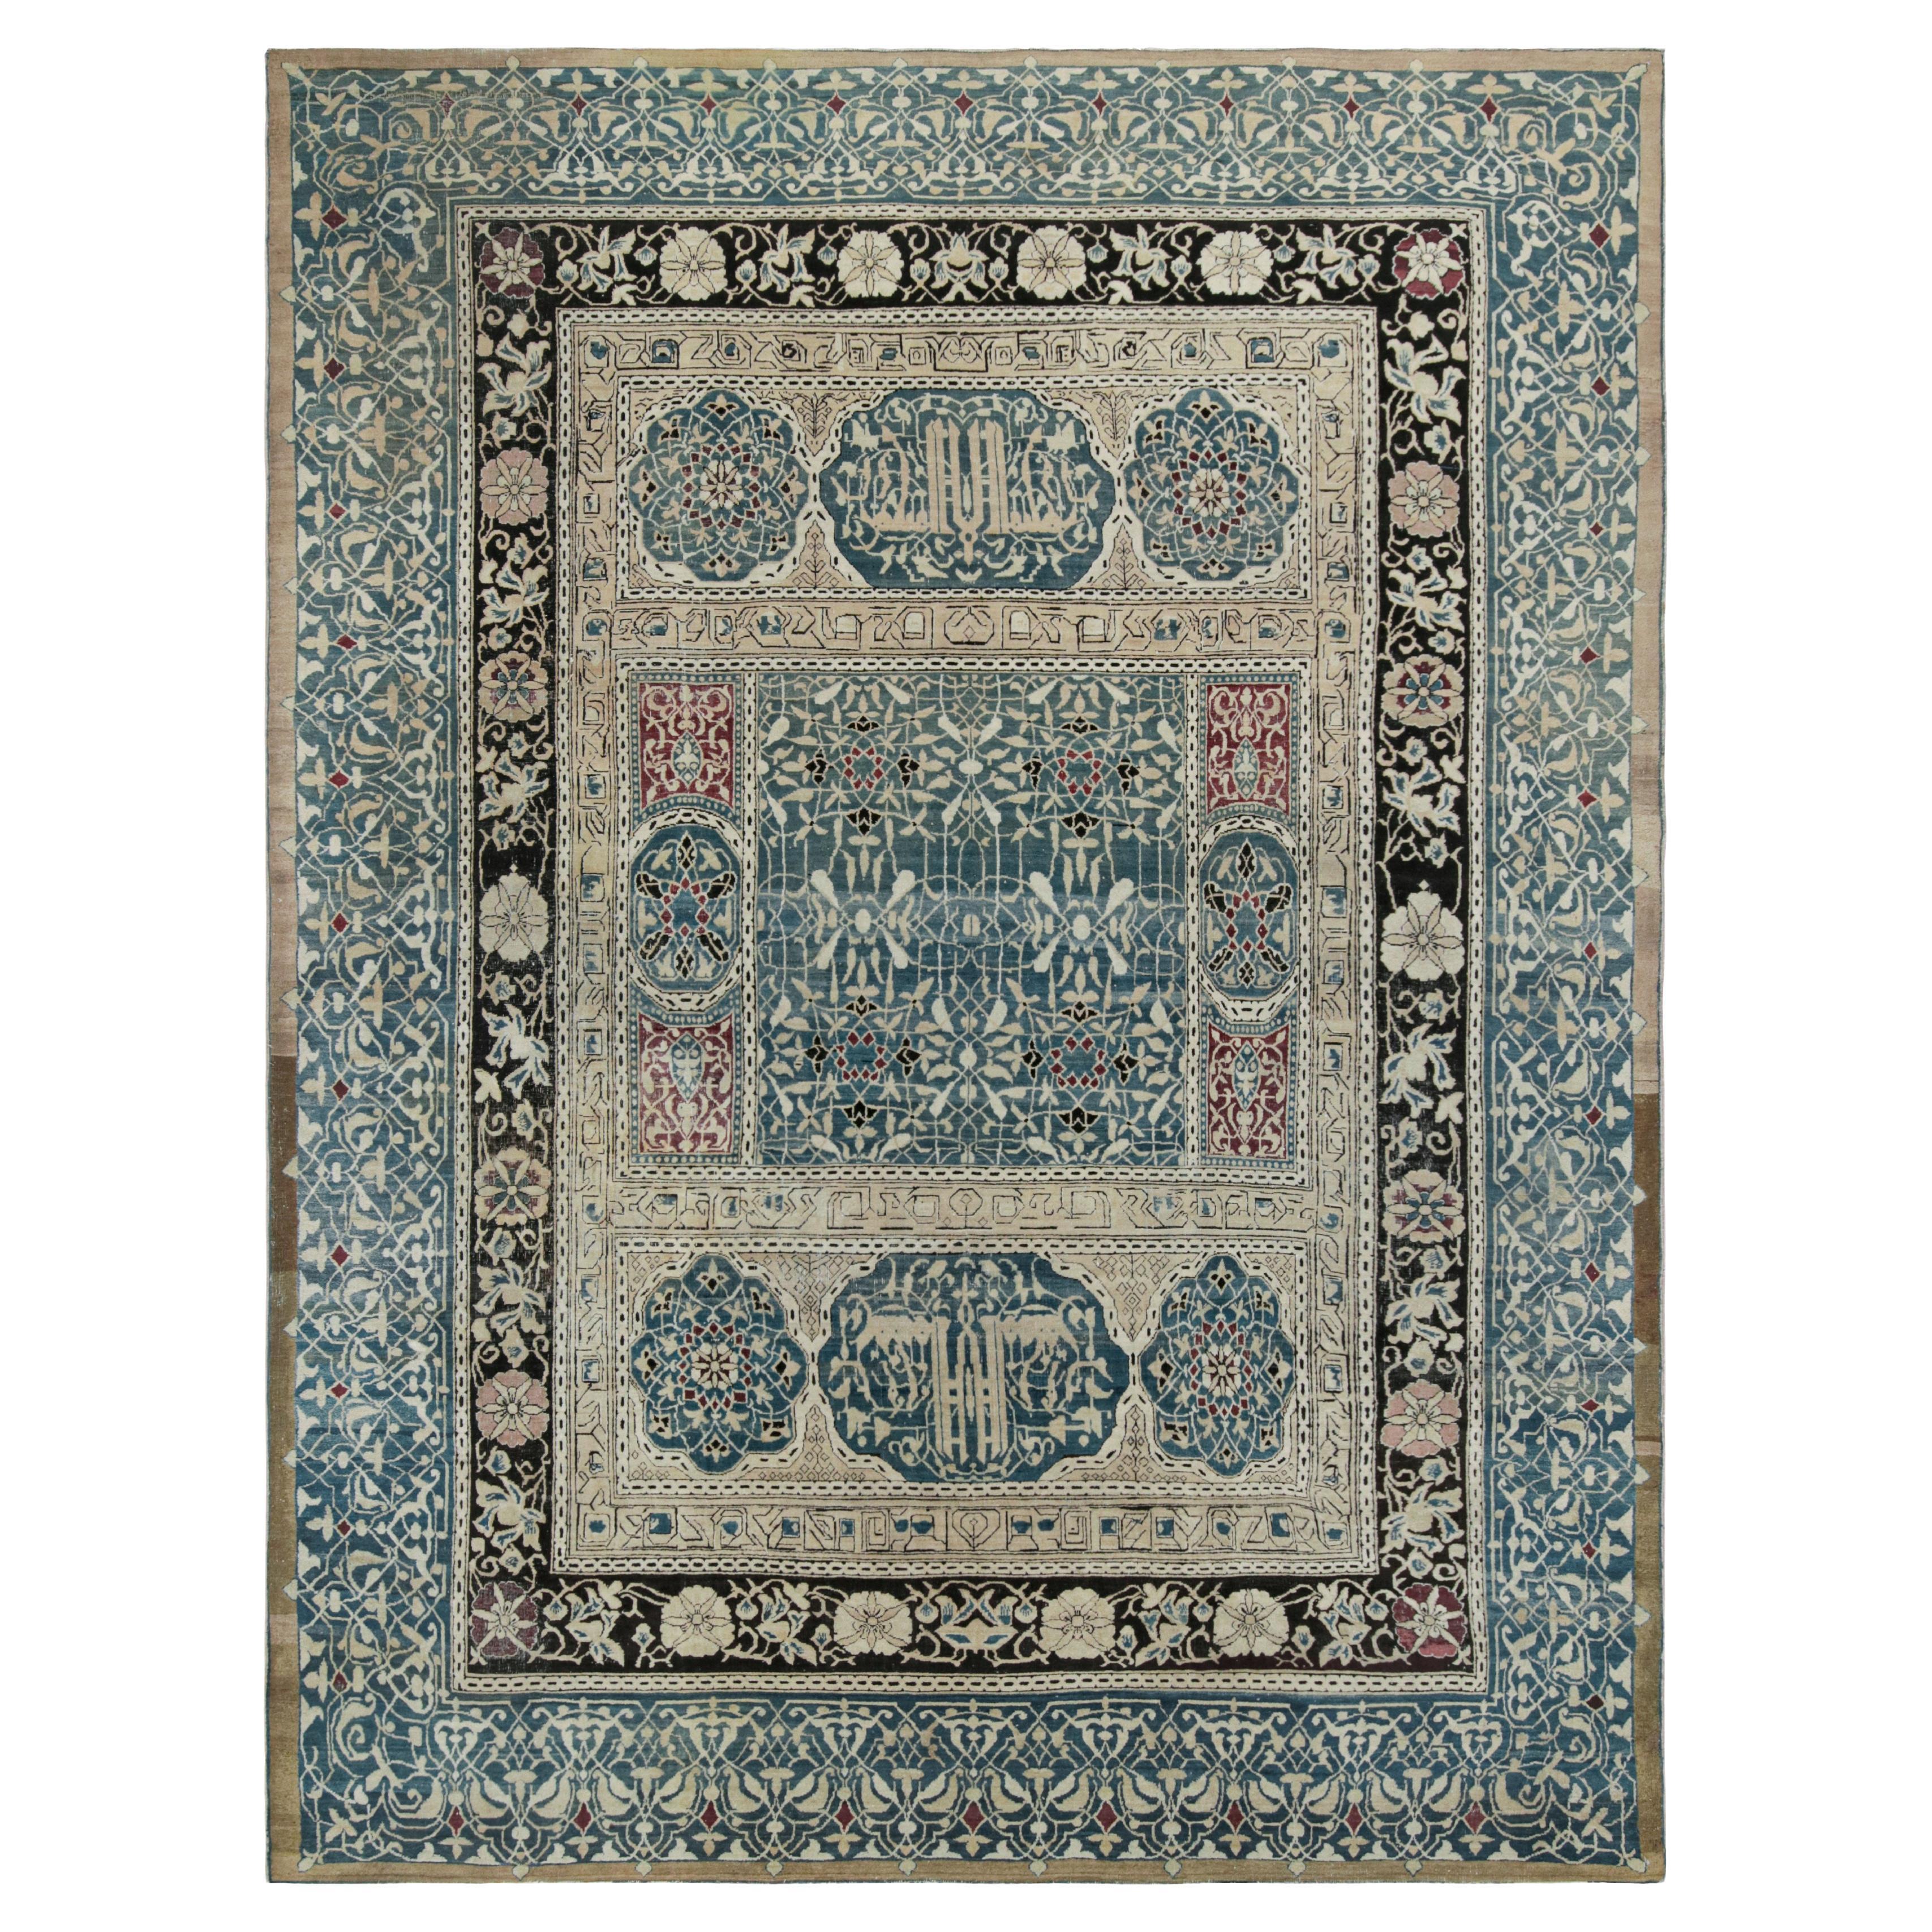 Antique Agra Rug in Beige and Teal with Floral Patterns, from Rug & Kilim